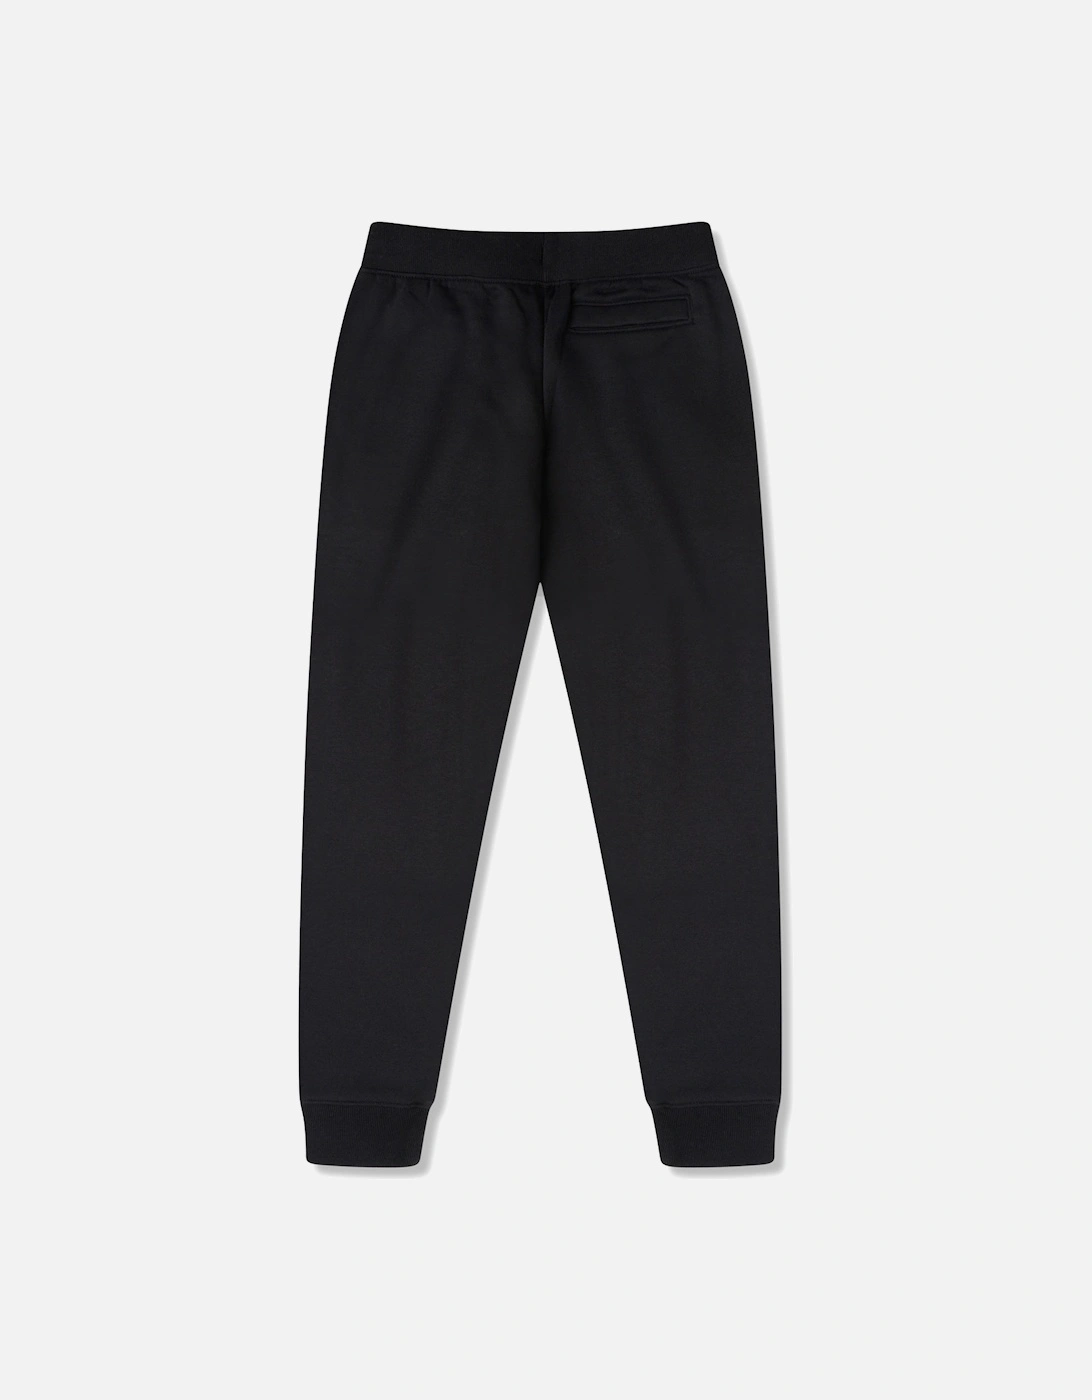 Youths Rival Cotton Joggers (Black)